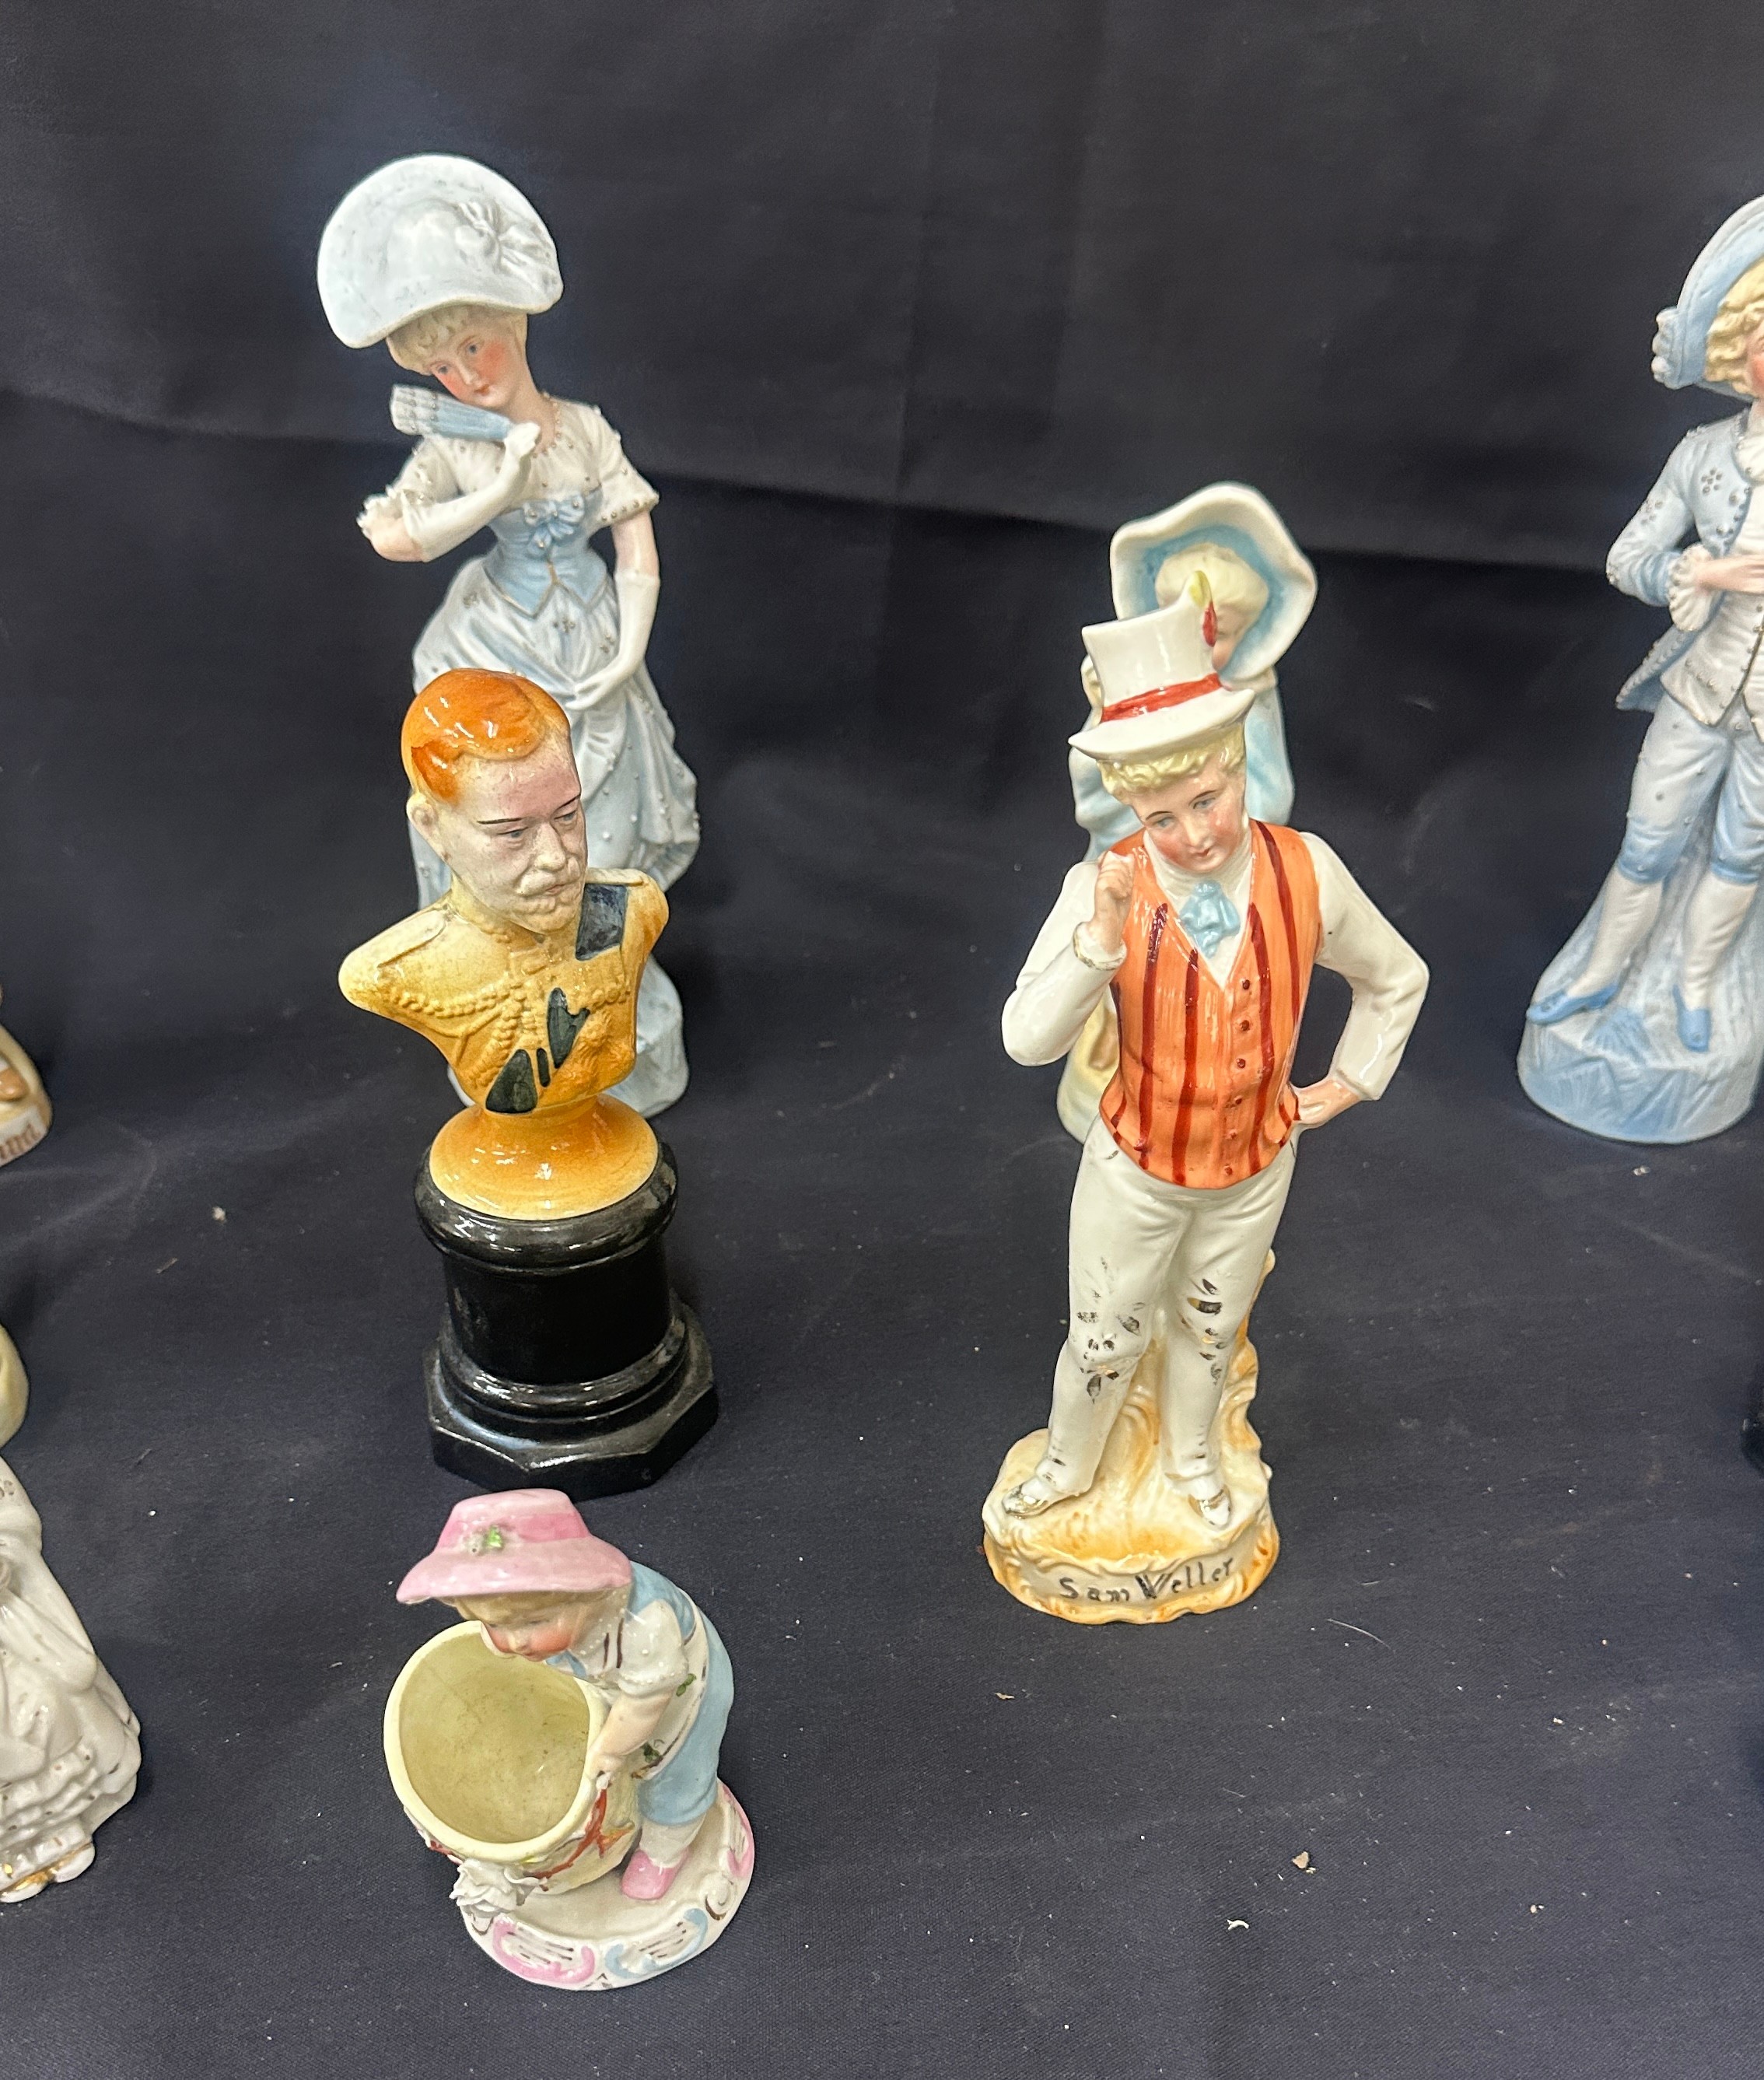 Quantity of antique bisque German figures tallest measures approx 10 inches - Image 3 of 5